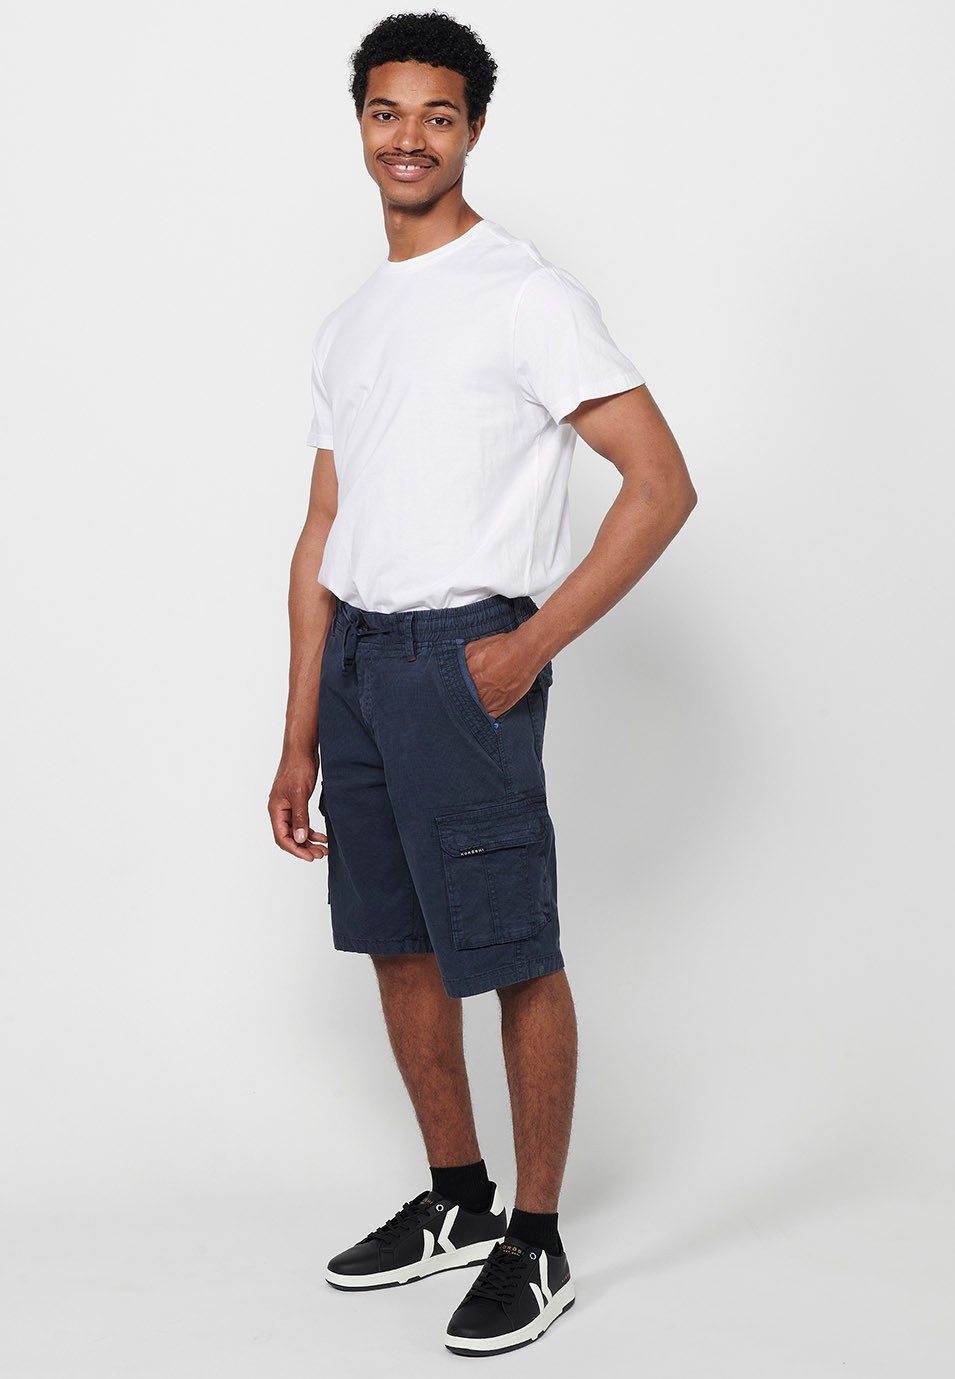 Cargo shorts with front closure with zipper and button and four pockets, two rear pockets with flap with two cargo pockets with flap and adjustable waist with drawstring in Navy Color for Men